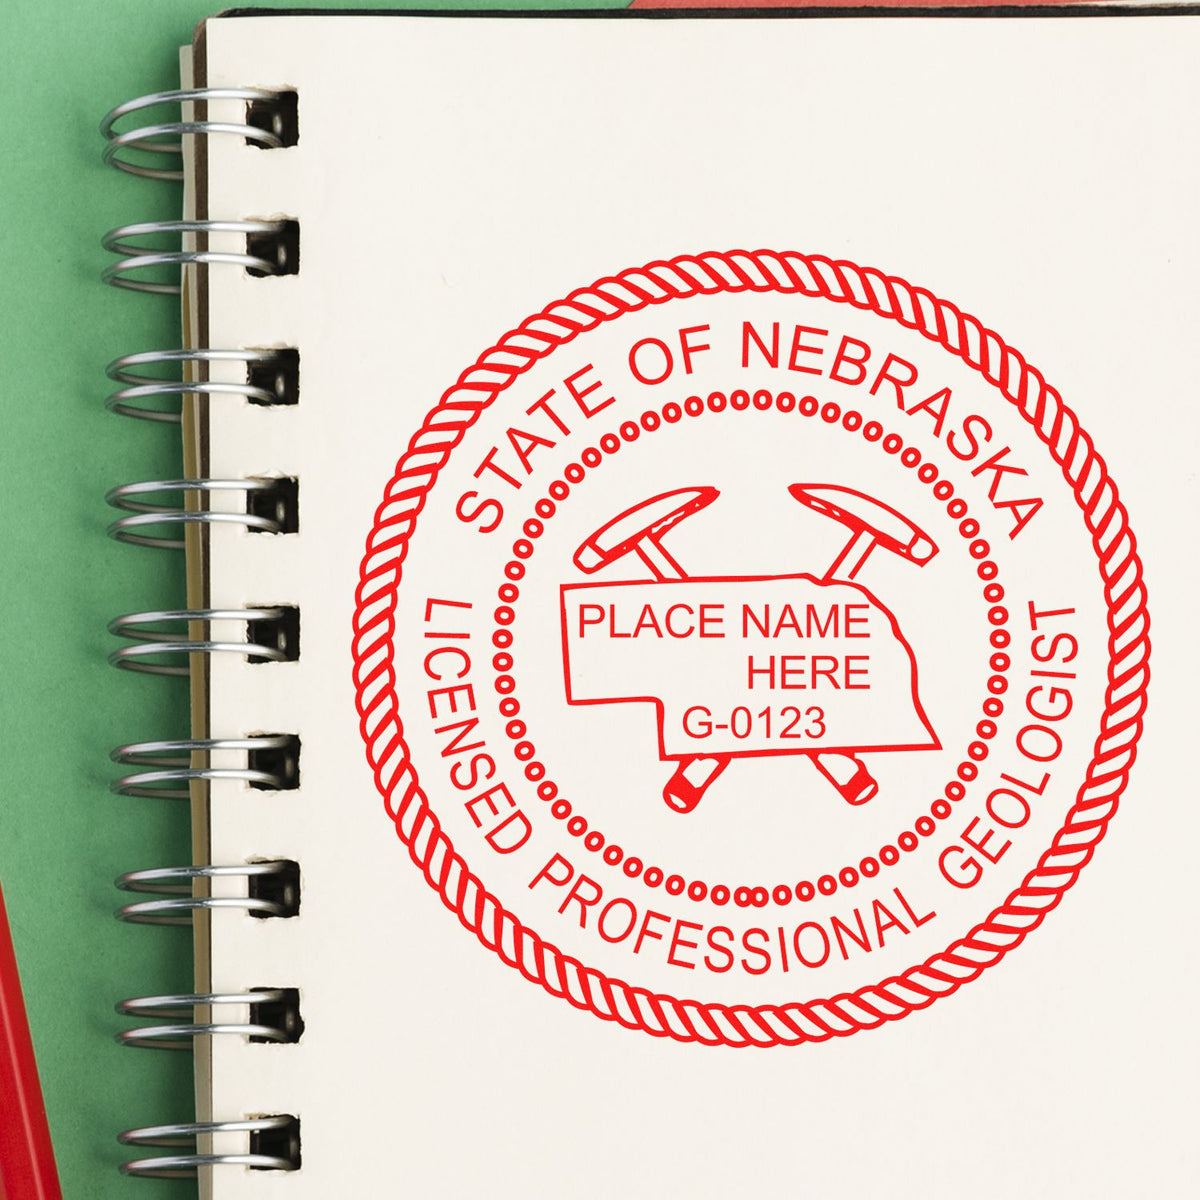 The Premium MaxLight Pre-Inked Nebraska Geology Stamp stamp impression comes to life with a crisp, detailed image stamped on paper - showcasing true professional quality.